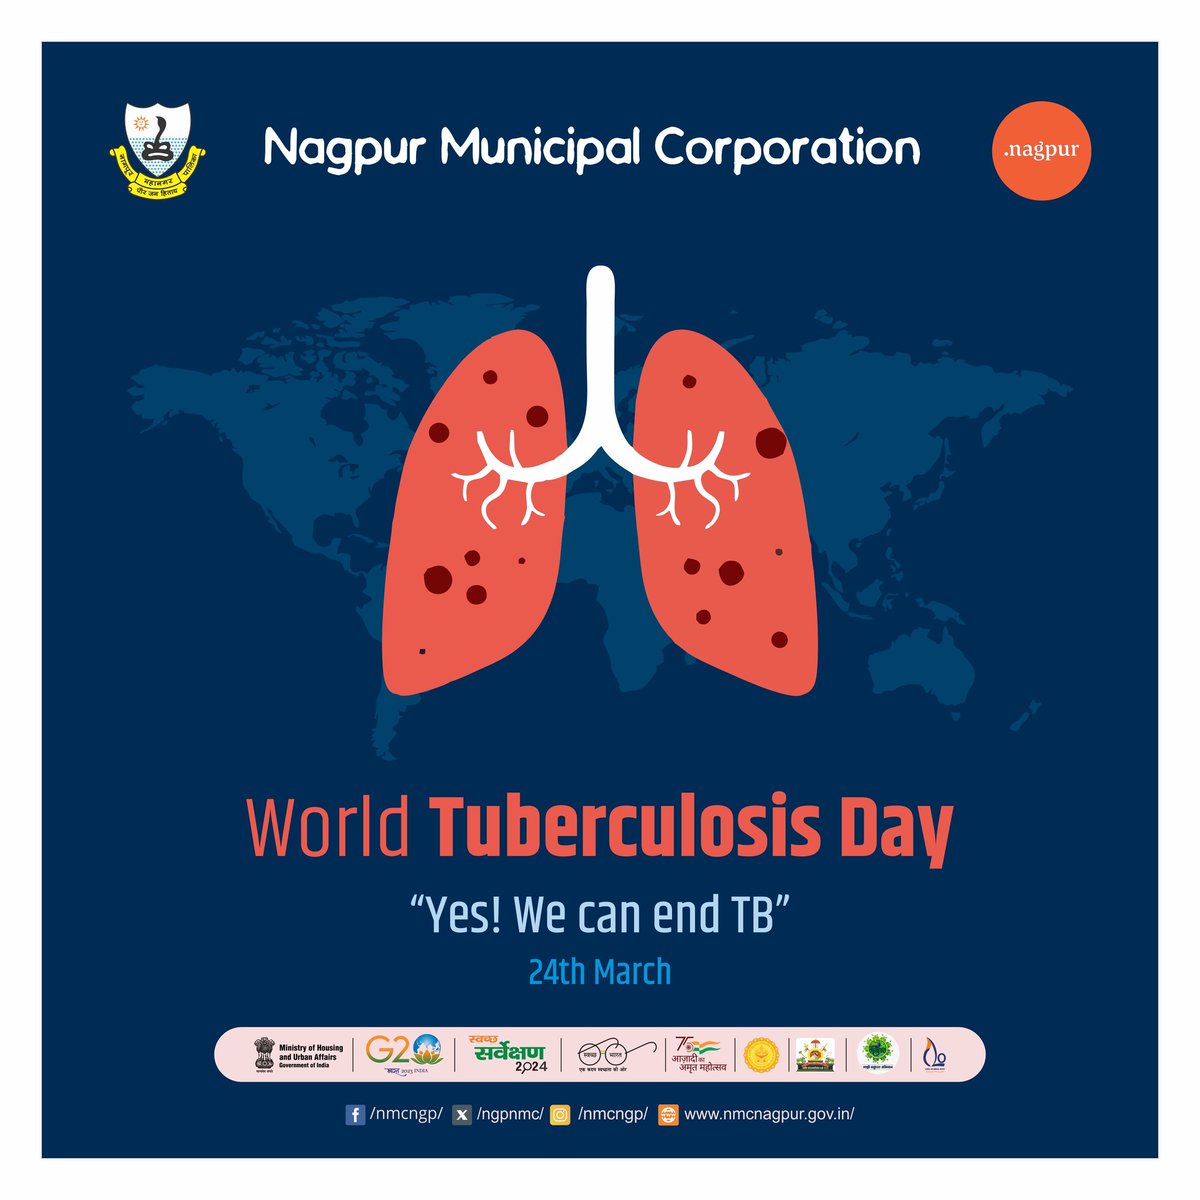 World Tuberculosis day
'Yes! We can end TB!'
.
.
.
.
#Nmc #nagpurcity #TB #helpingtbpatients #tuberculosis #WorldTuberculosisDay2023
#WecanendTB #WHO